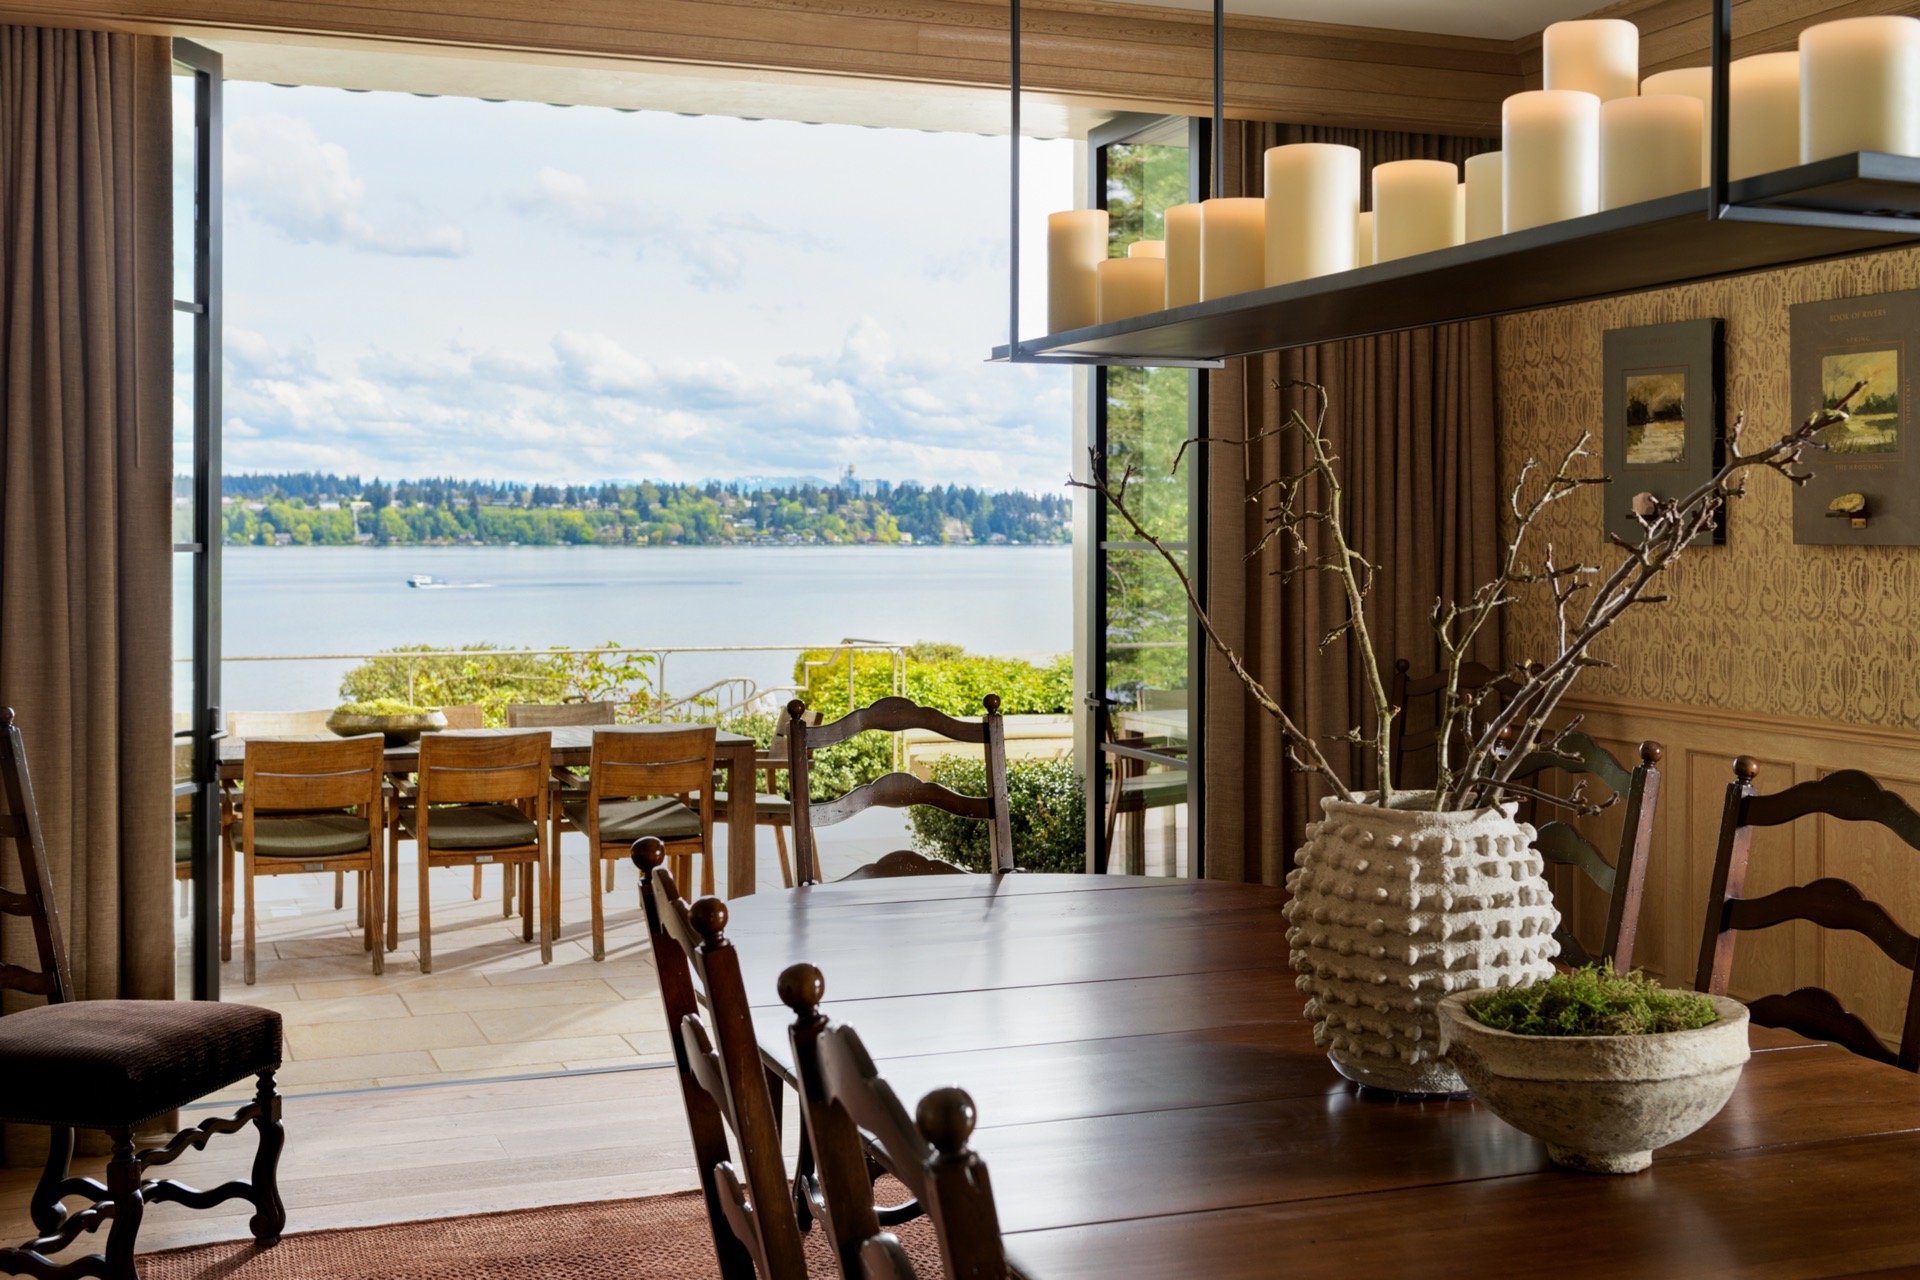 Francis York Waterfront Mansion in Seattle’s Exclusive Enclave, The Reed Estate 20.jpg